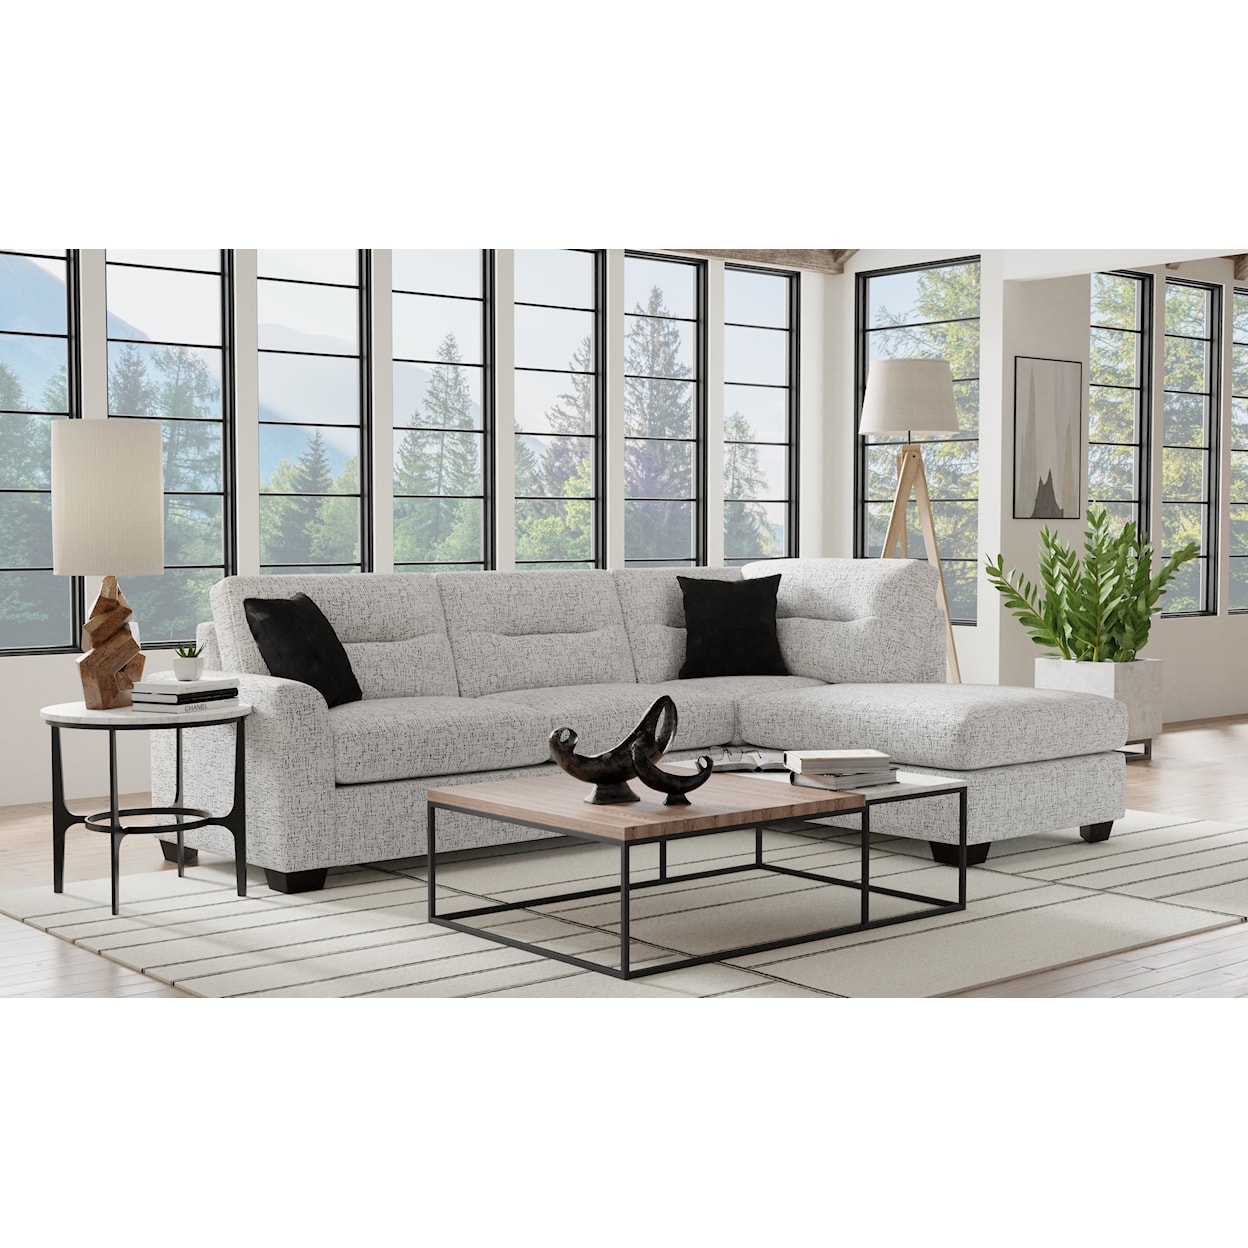 Peak Living Devin Devin Sectional Sofa with Chaise